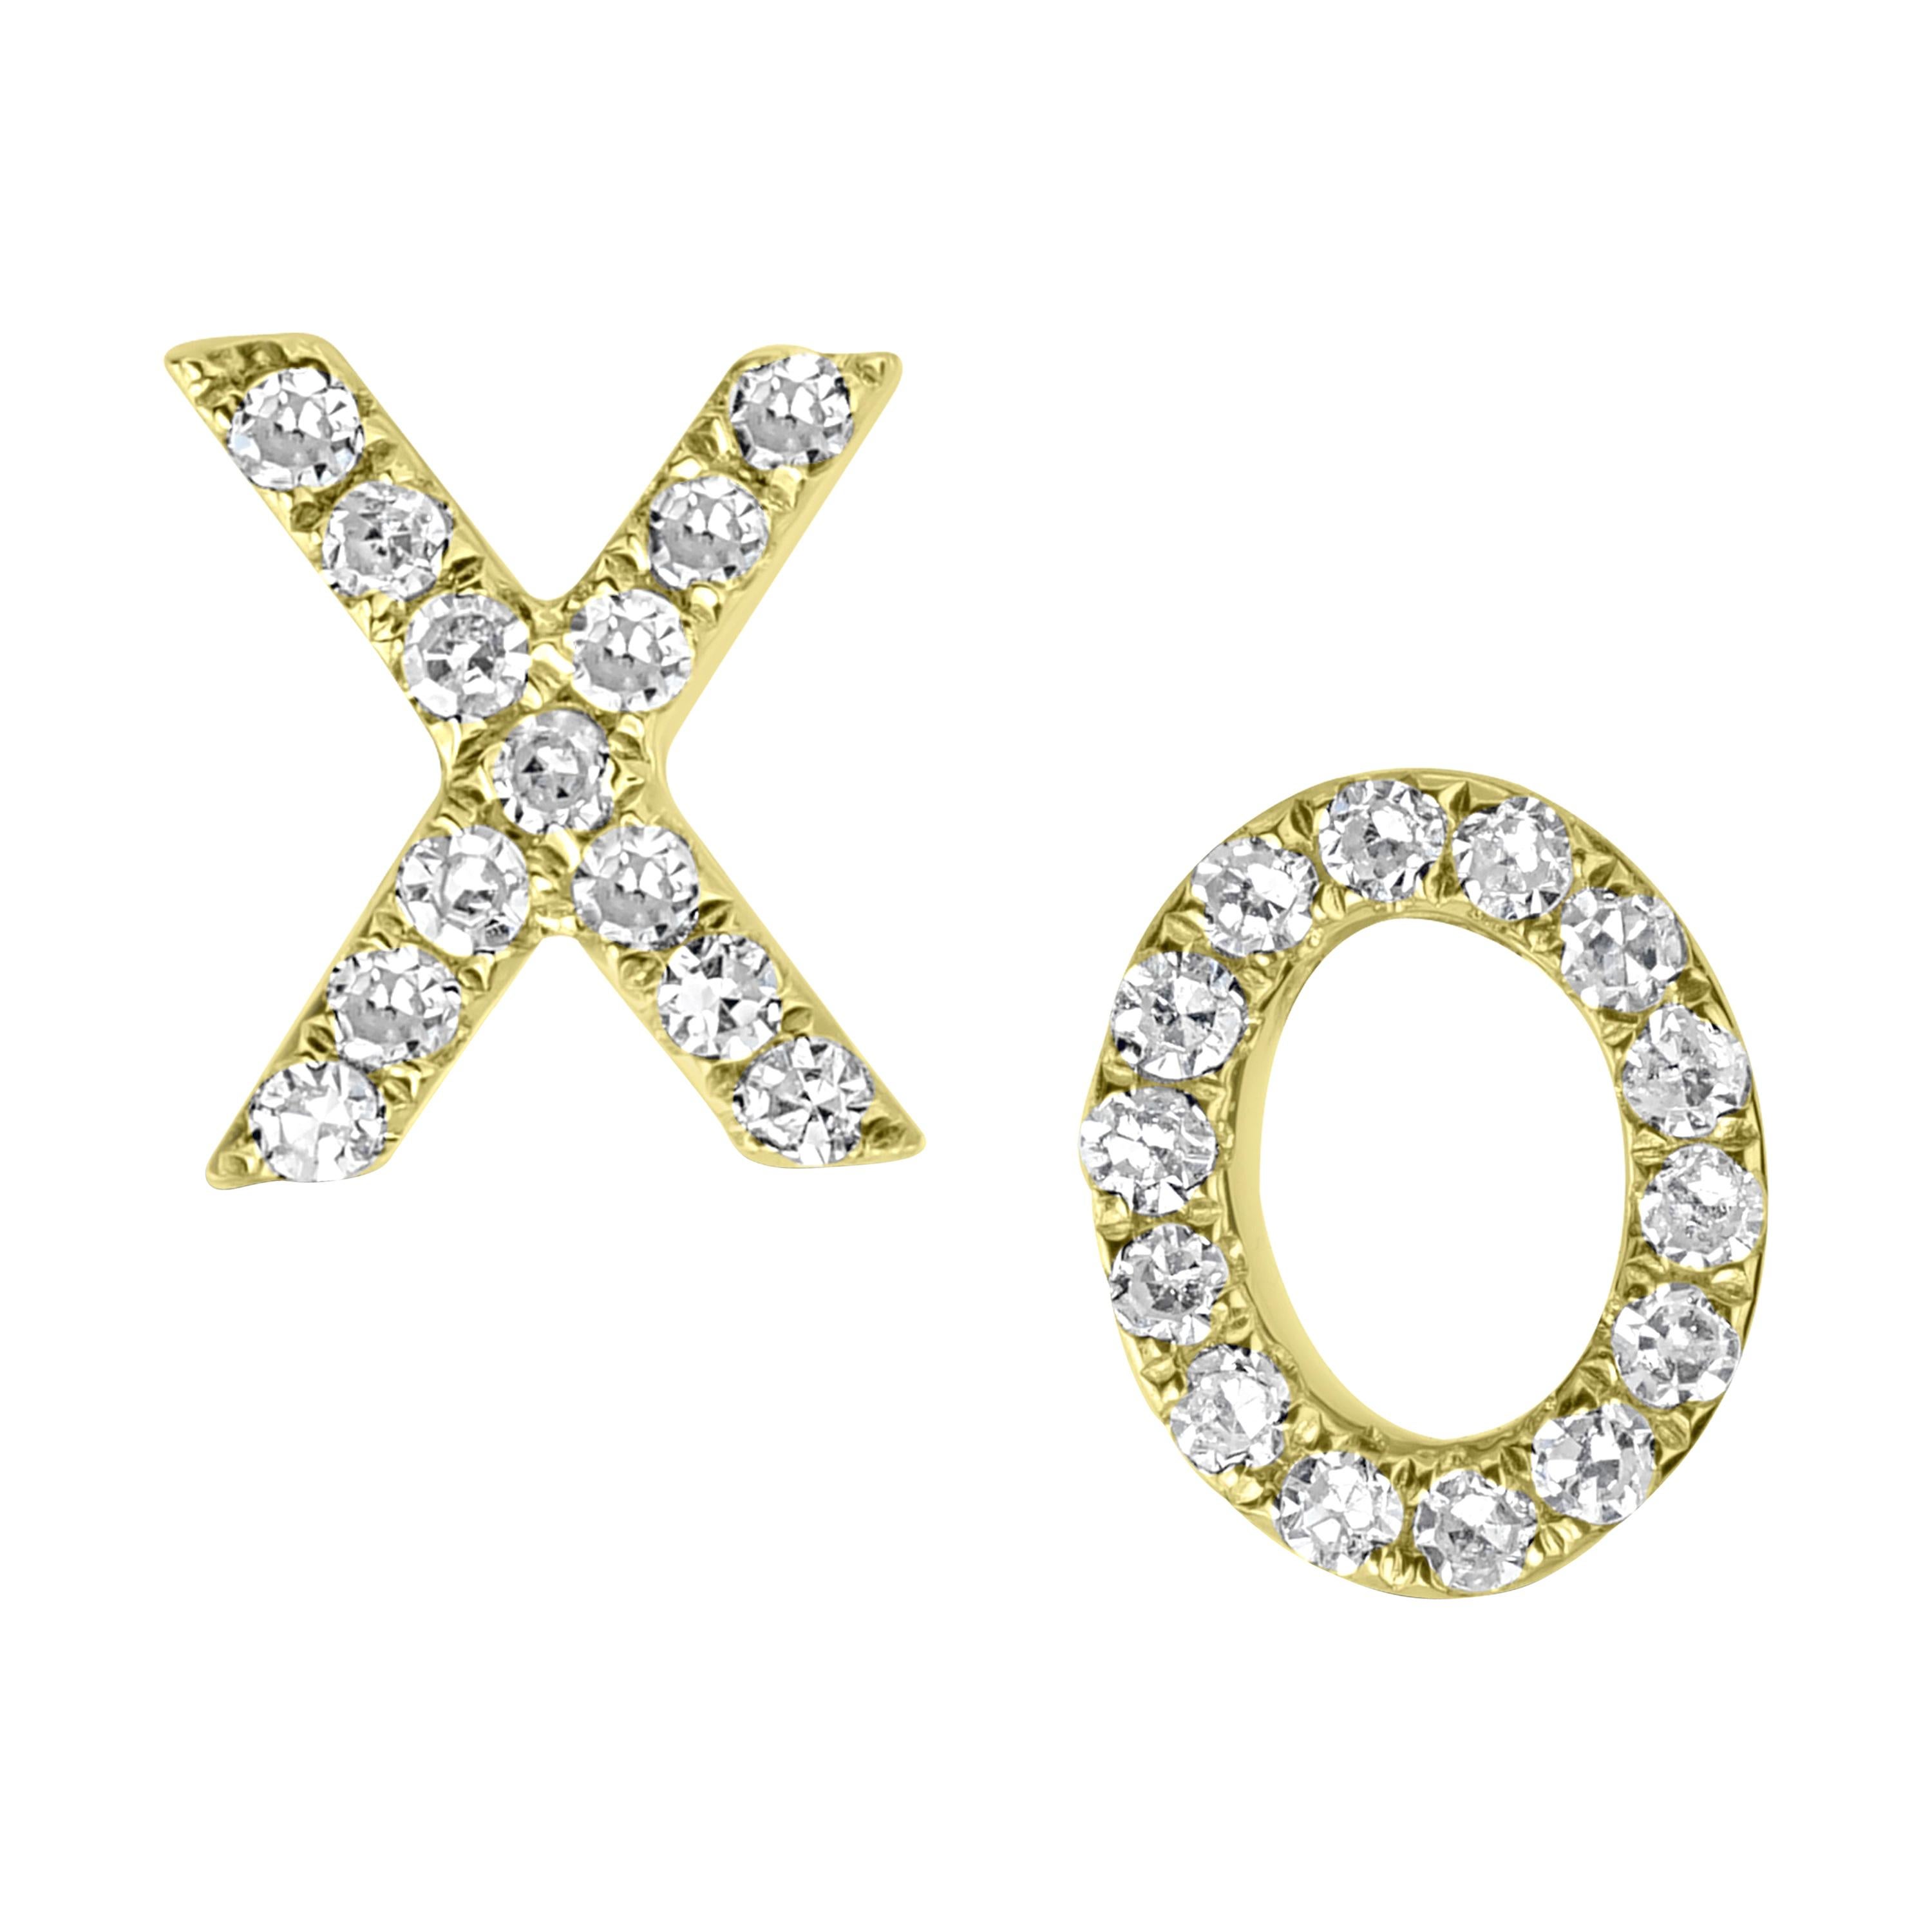 Round Cut Luxle Round Single Cut Pave Diamond XO Stud Earrings in 18k Yellow Gold For Sale